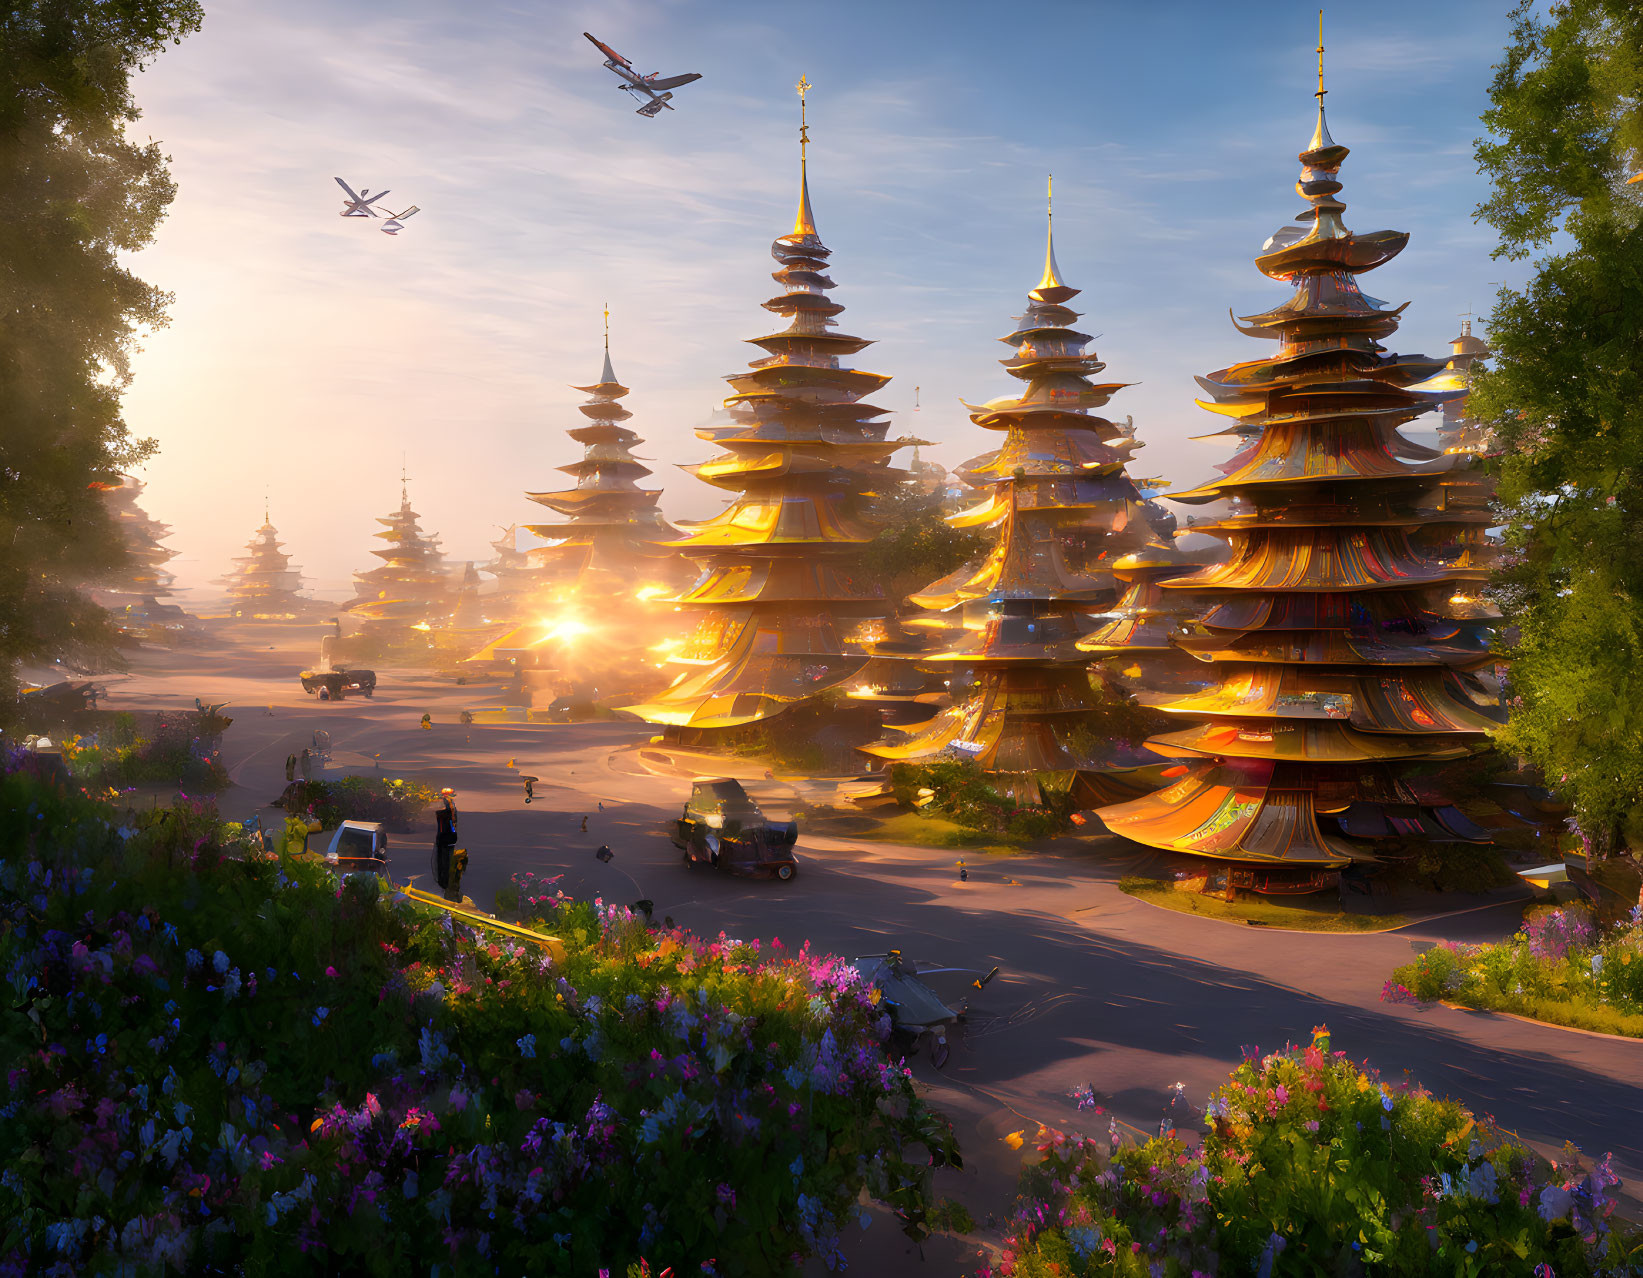 Traditional pagodas surrounded by blooming flowers and bustling activity under the warm sun.